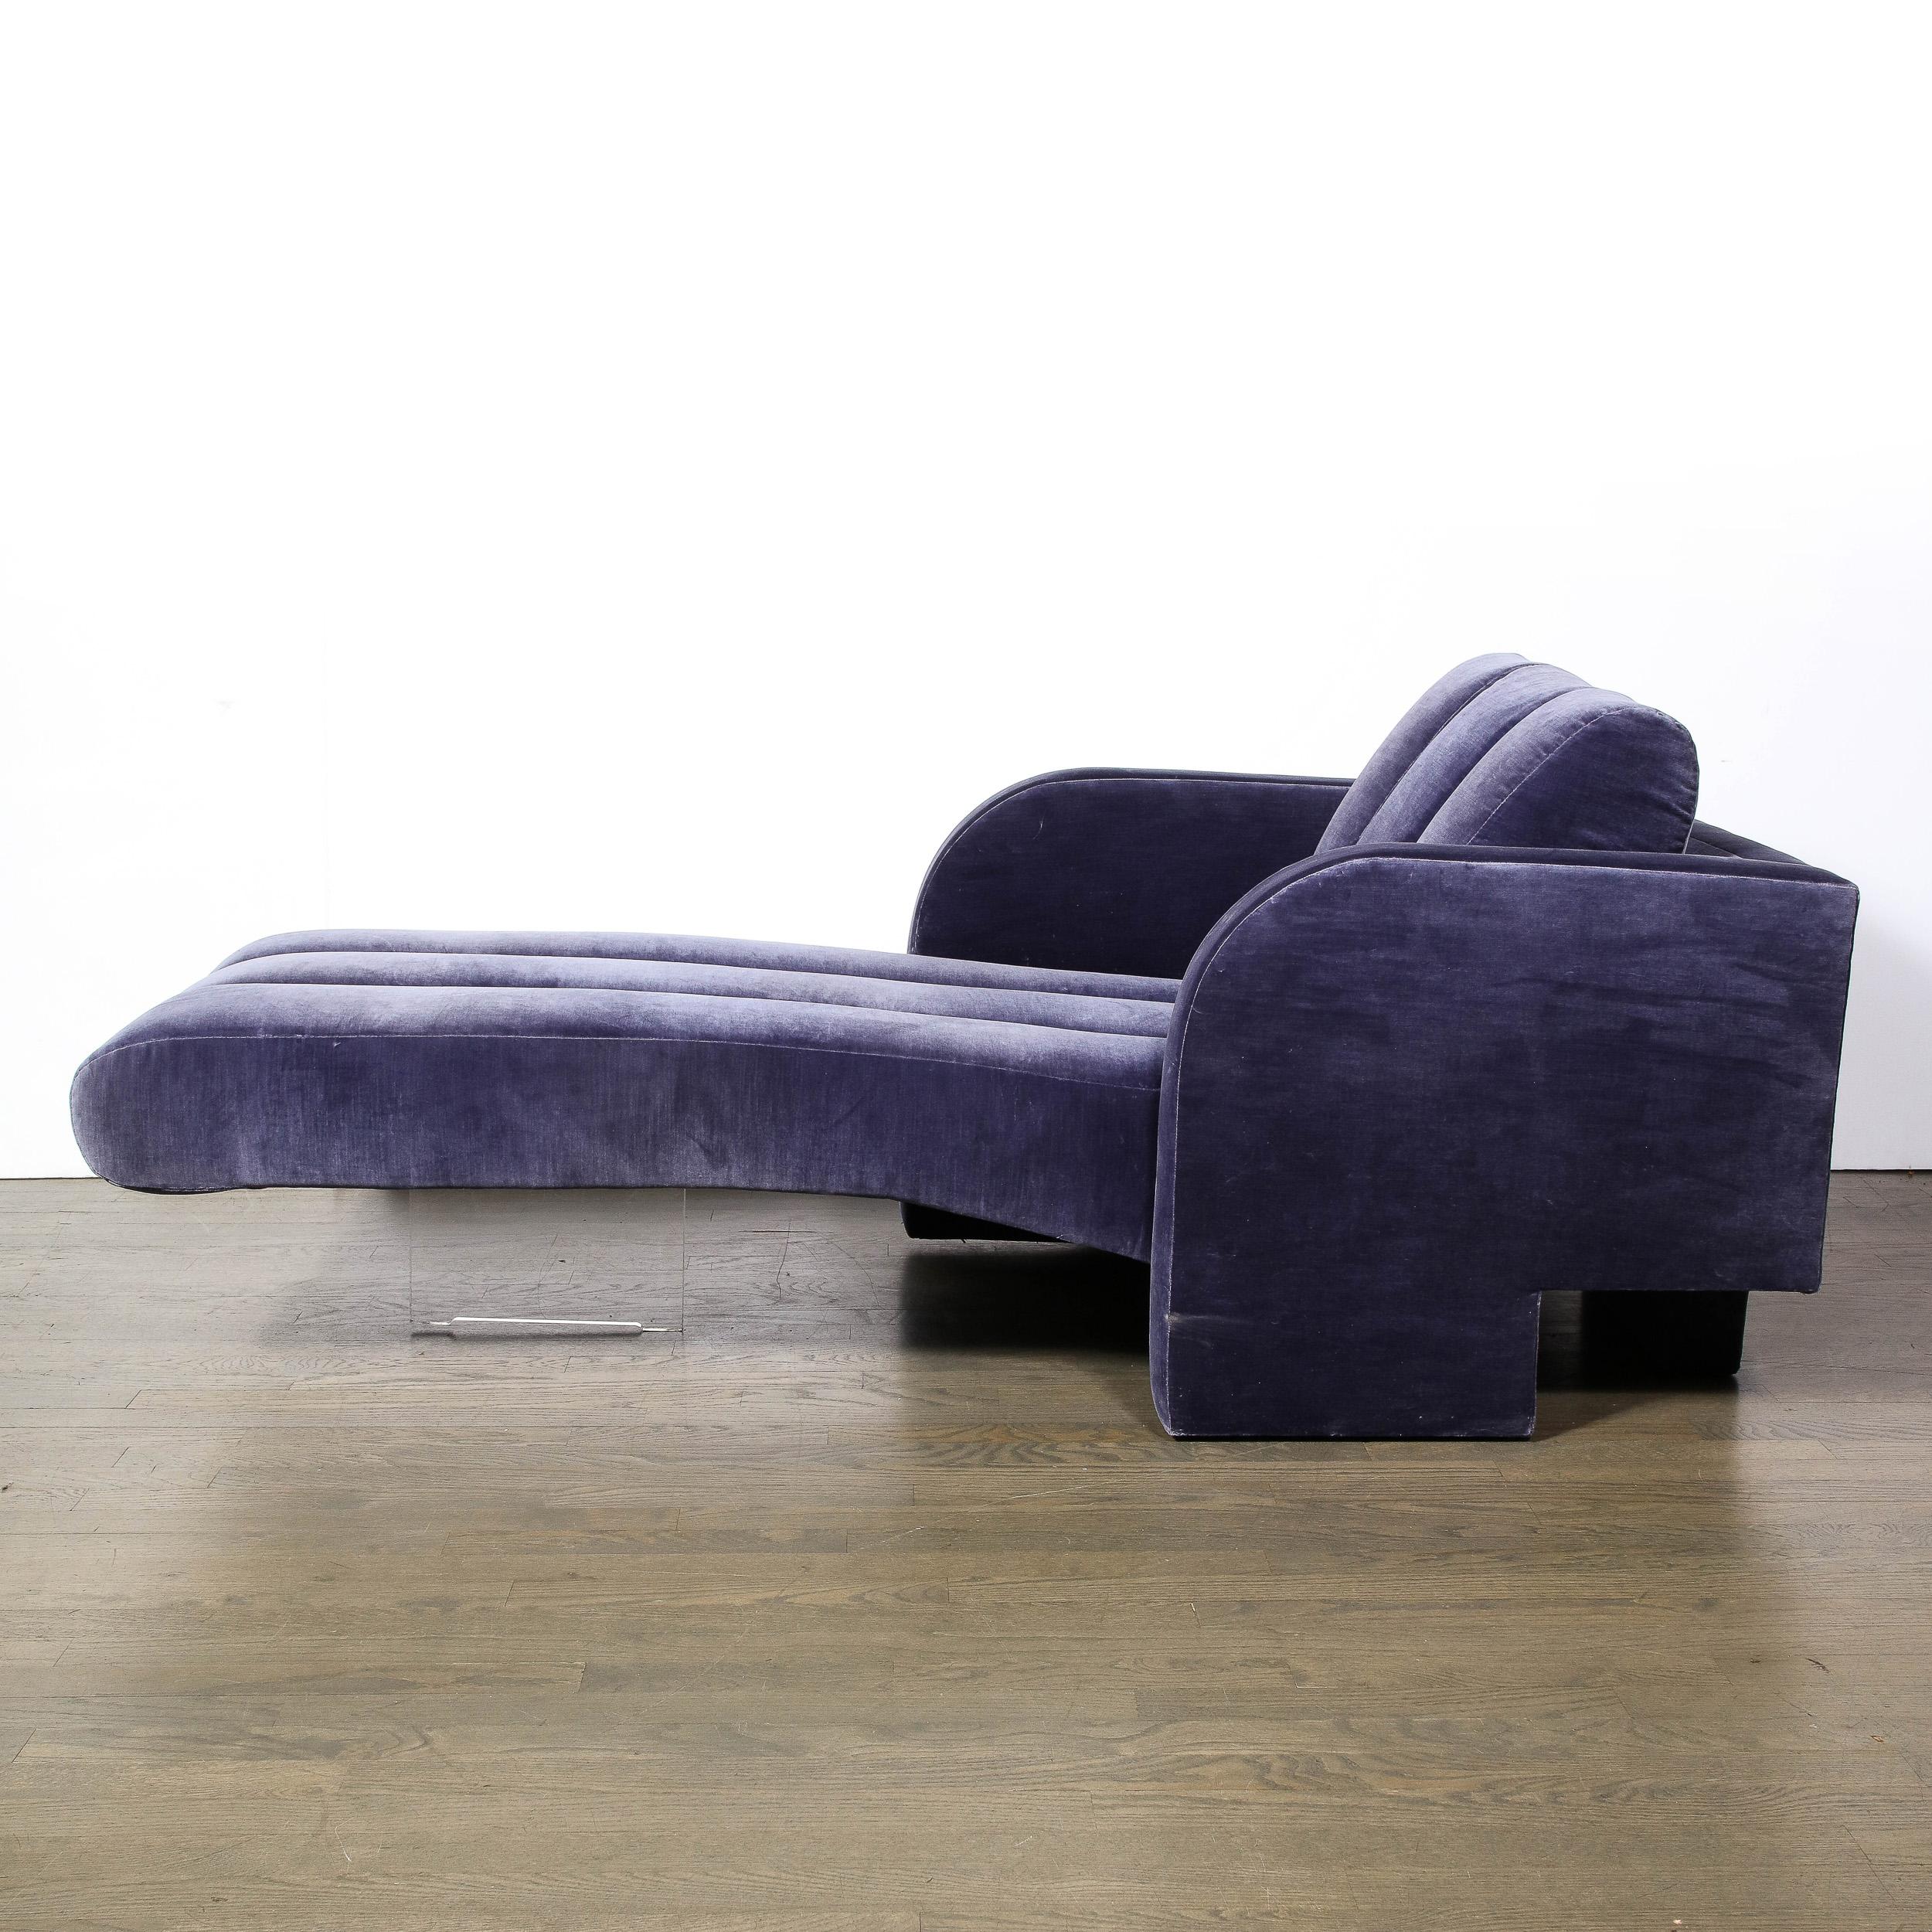 This stunning Mid-Century Modern 'Deco Chaise' Model 7530 by Vladimir Kagan represents one of the most iconic design objects of the late 20th century. Arguably the best example of Art Deco revival ever created, this piece is a powerful ode to 1930s